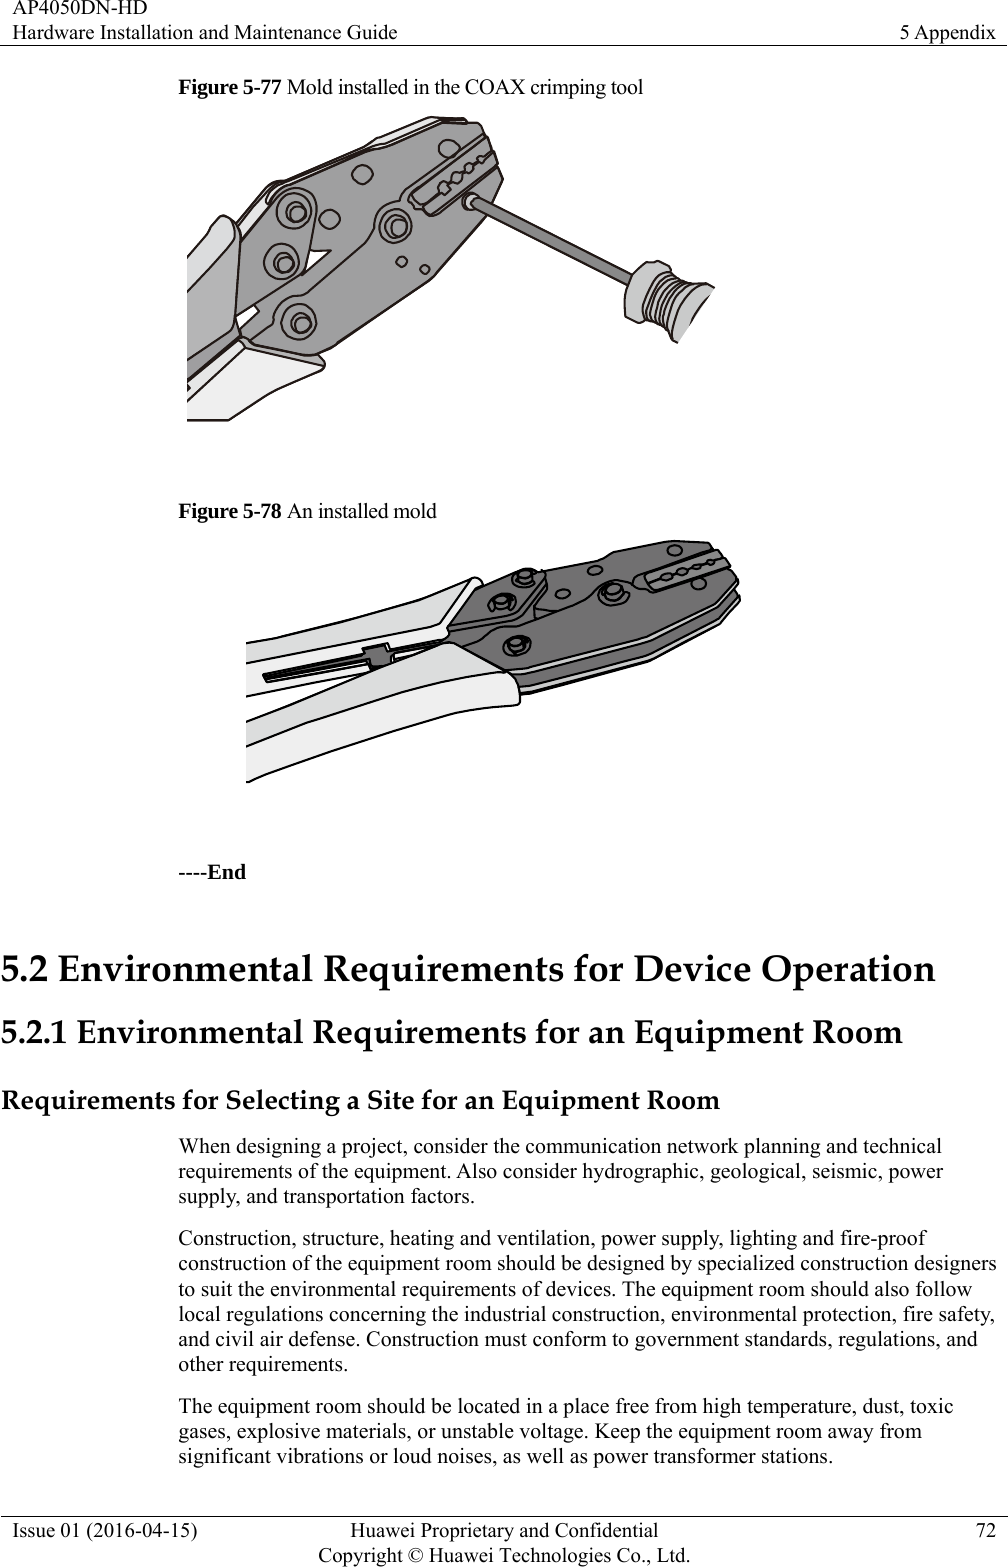 AP4050DN-HD Hardware Installation and Maintenance Guide  5 Appendix Issue 01 (2016-04-15)  Huawei Proprietary and Confidential         Copyright © Huawei Technologies Co., Ltd.72 Figure 5-77 Mold installed in the COAX crimping tool   Figure 5-78 An installed mold   ----End 5.2 Environmental Requirements for Device Operation 5.2.1 Environmental Requirements for an Equipment Room Requirements for Selecting a Site for an Equipment Room When designing a project, consider the communication network planning and technical requirements of the equipment. Also consider hydrographic, geological, seismic, power supply, and transportation factors. Construction, structure, heating and ventilation, power supply, lighting and fire-proof construction of the equipment room should be designed by specialized construction designers to suit the environmental requirements of devices. The equipment room should also follow local regulations concerning the industrial construction, environmental protection, fire safety, and civil air defense. Construction must conform to government standards, regulations, and other requirements. The equipment room should be located in a place free from high temperature, dust, toxic gases, explosive materials, or unstable voltage. Keep the equipment room away from significant vibrations or loud noises, as well as power transformer stations. 